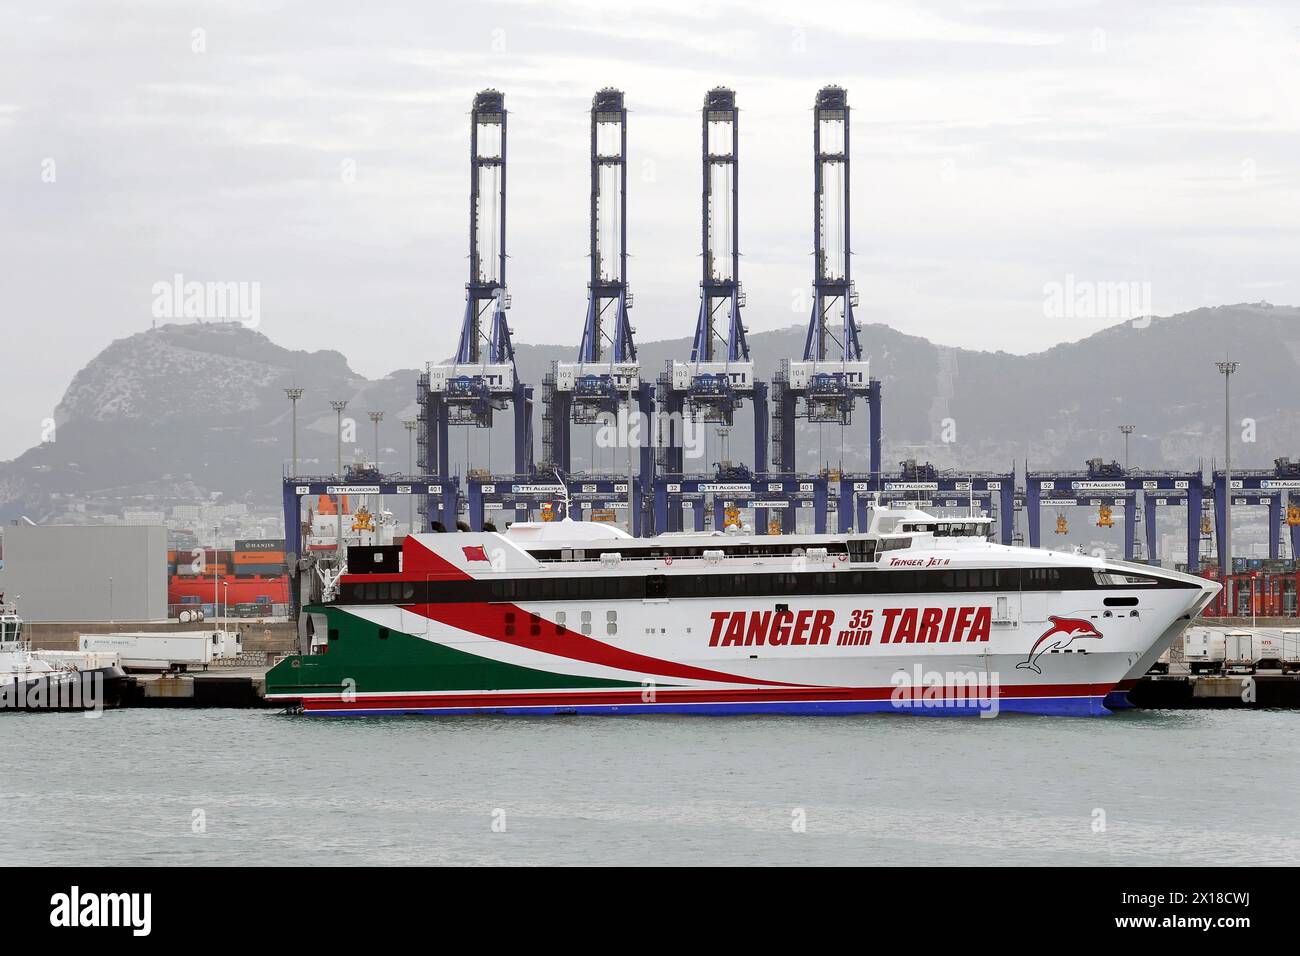 CEUTA, fast ferry 'Tanger 35 Tarifa' in the harbour in front of cranes, Morocco Stock Photo